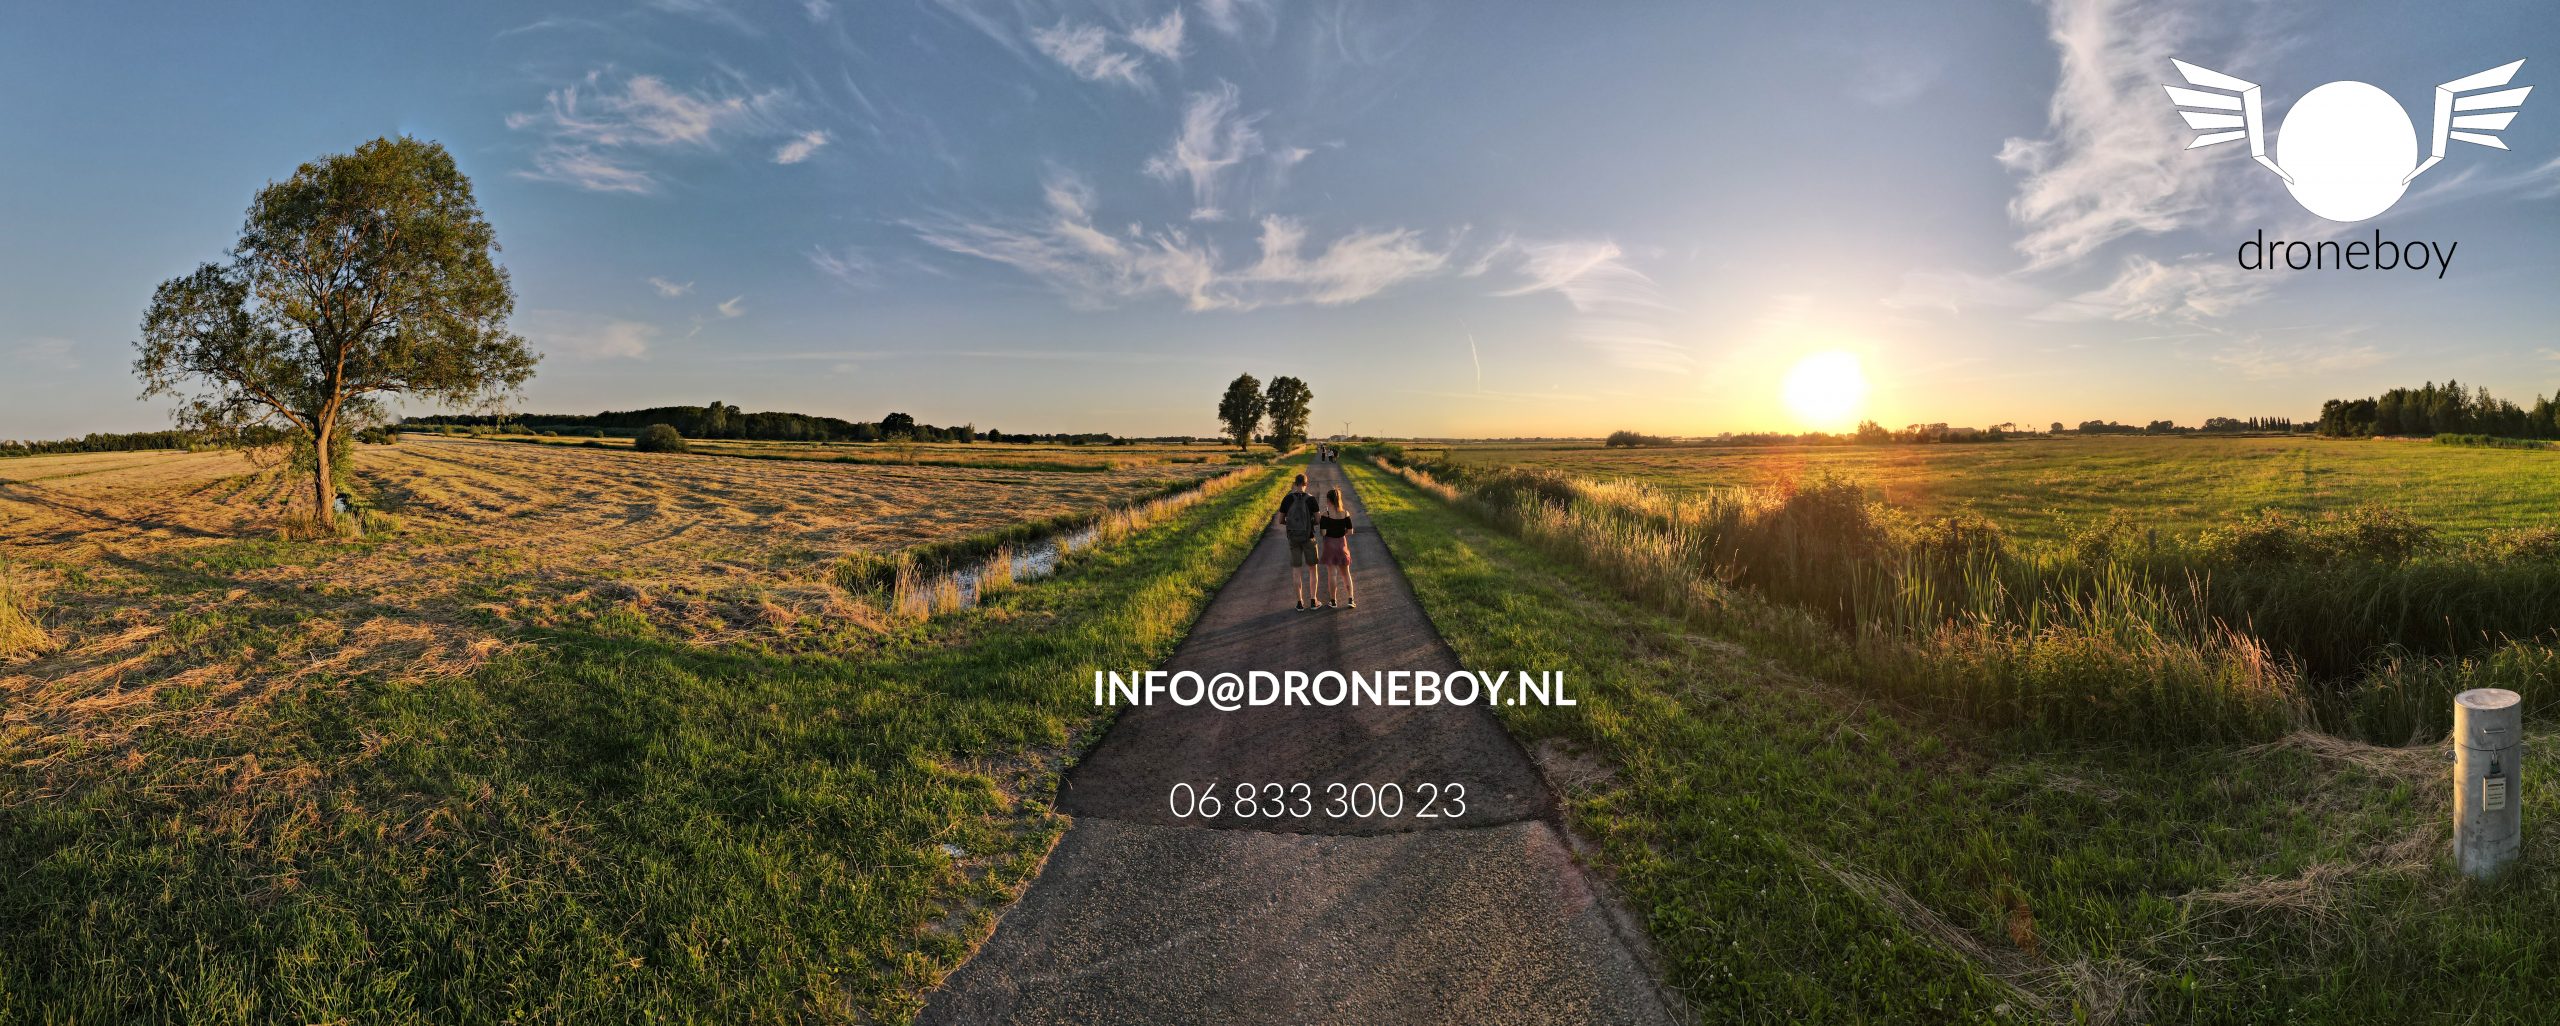 Contact droneboy